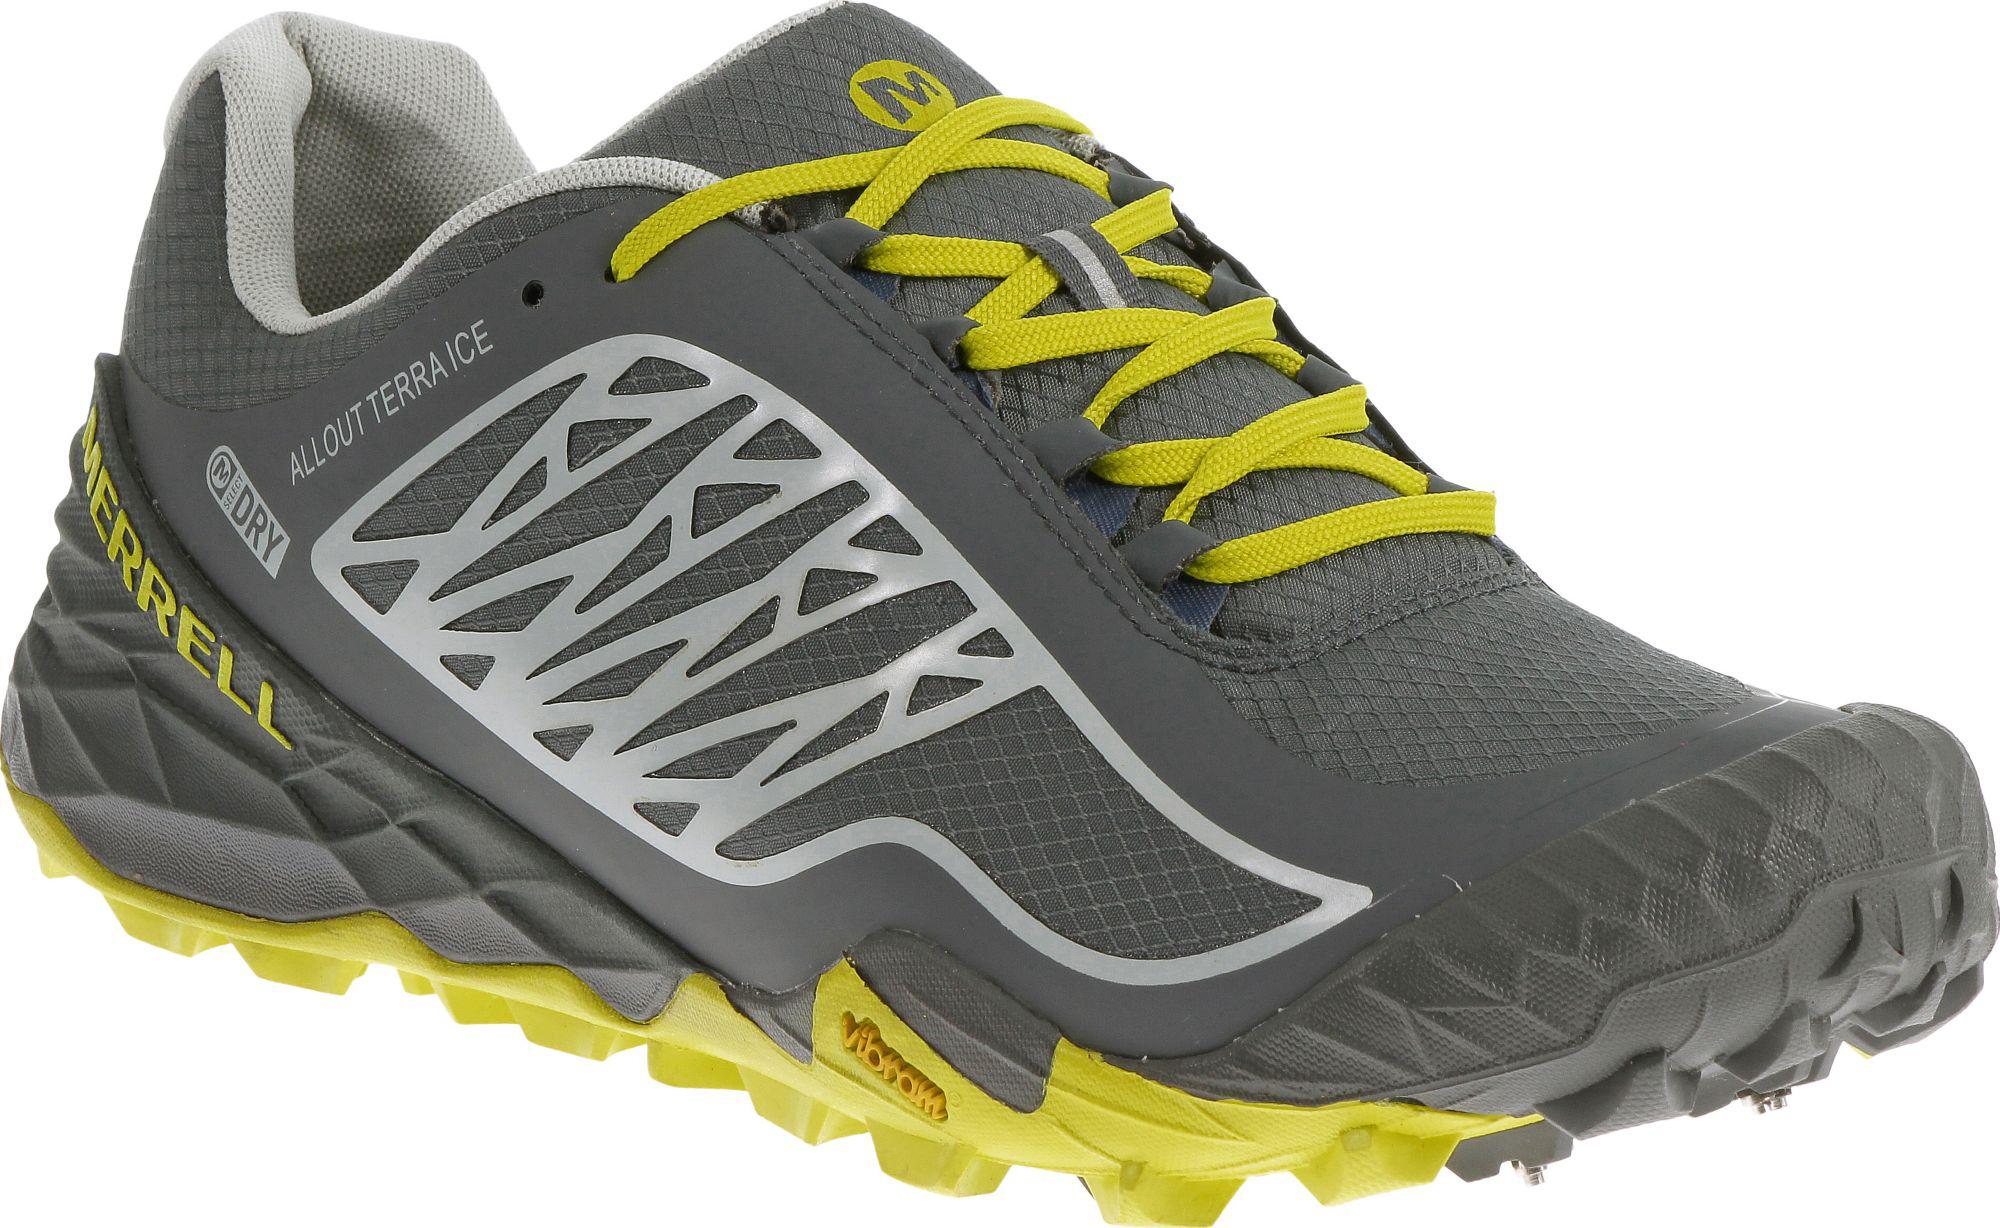 Merrell Synthetic All Out Terra Ice Waterproof Trail Running Shoes for ...